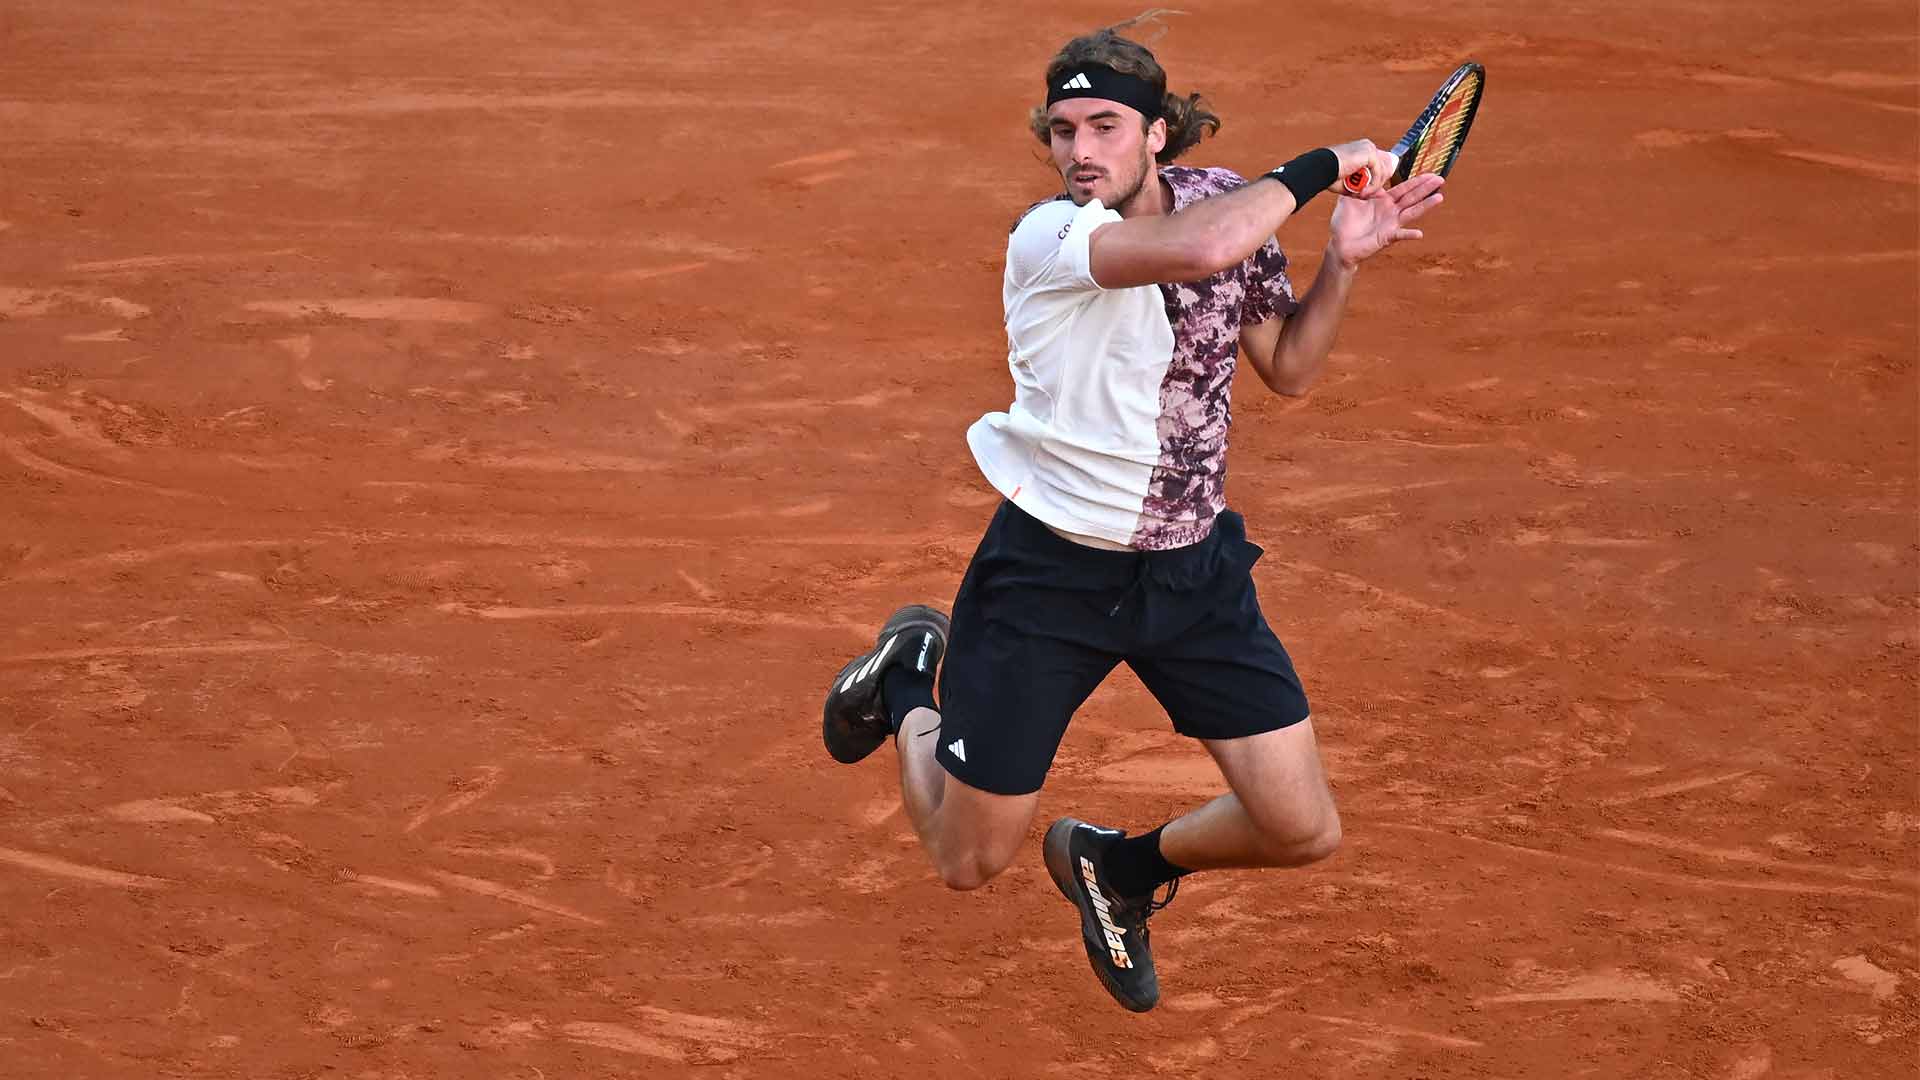 Stefanos Tsitsipas is now 13-2 in Monte-Carlo.